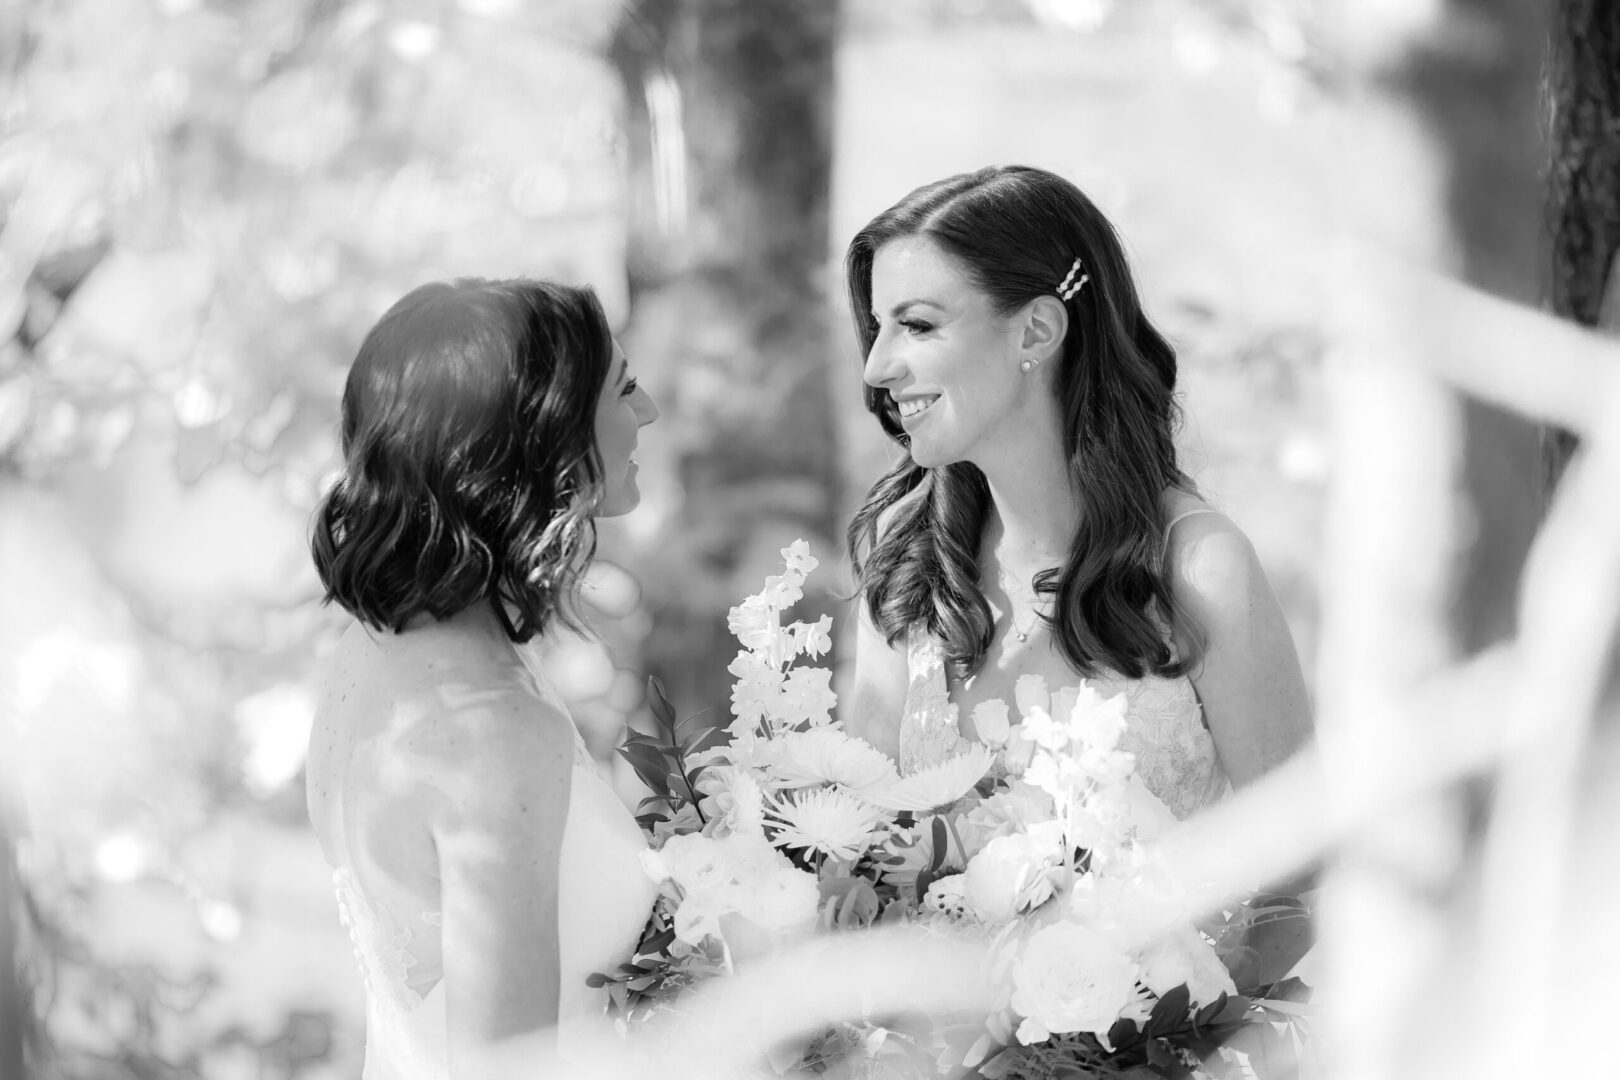 Two women talking at a wedding